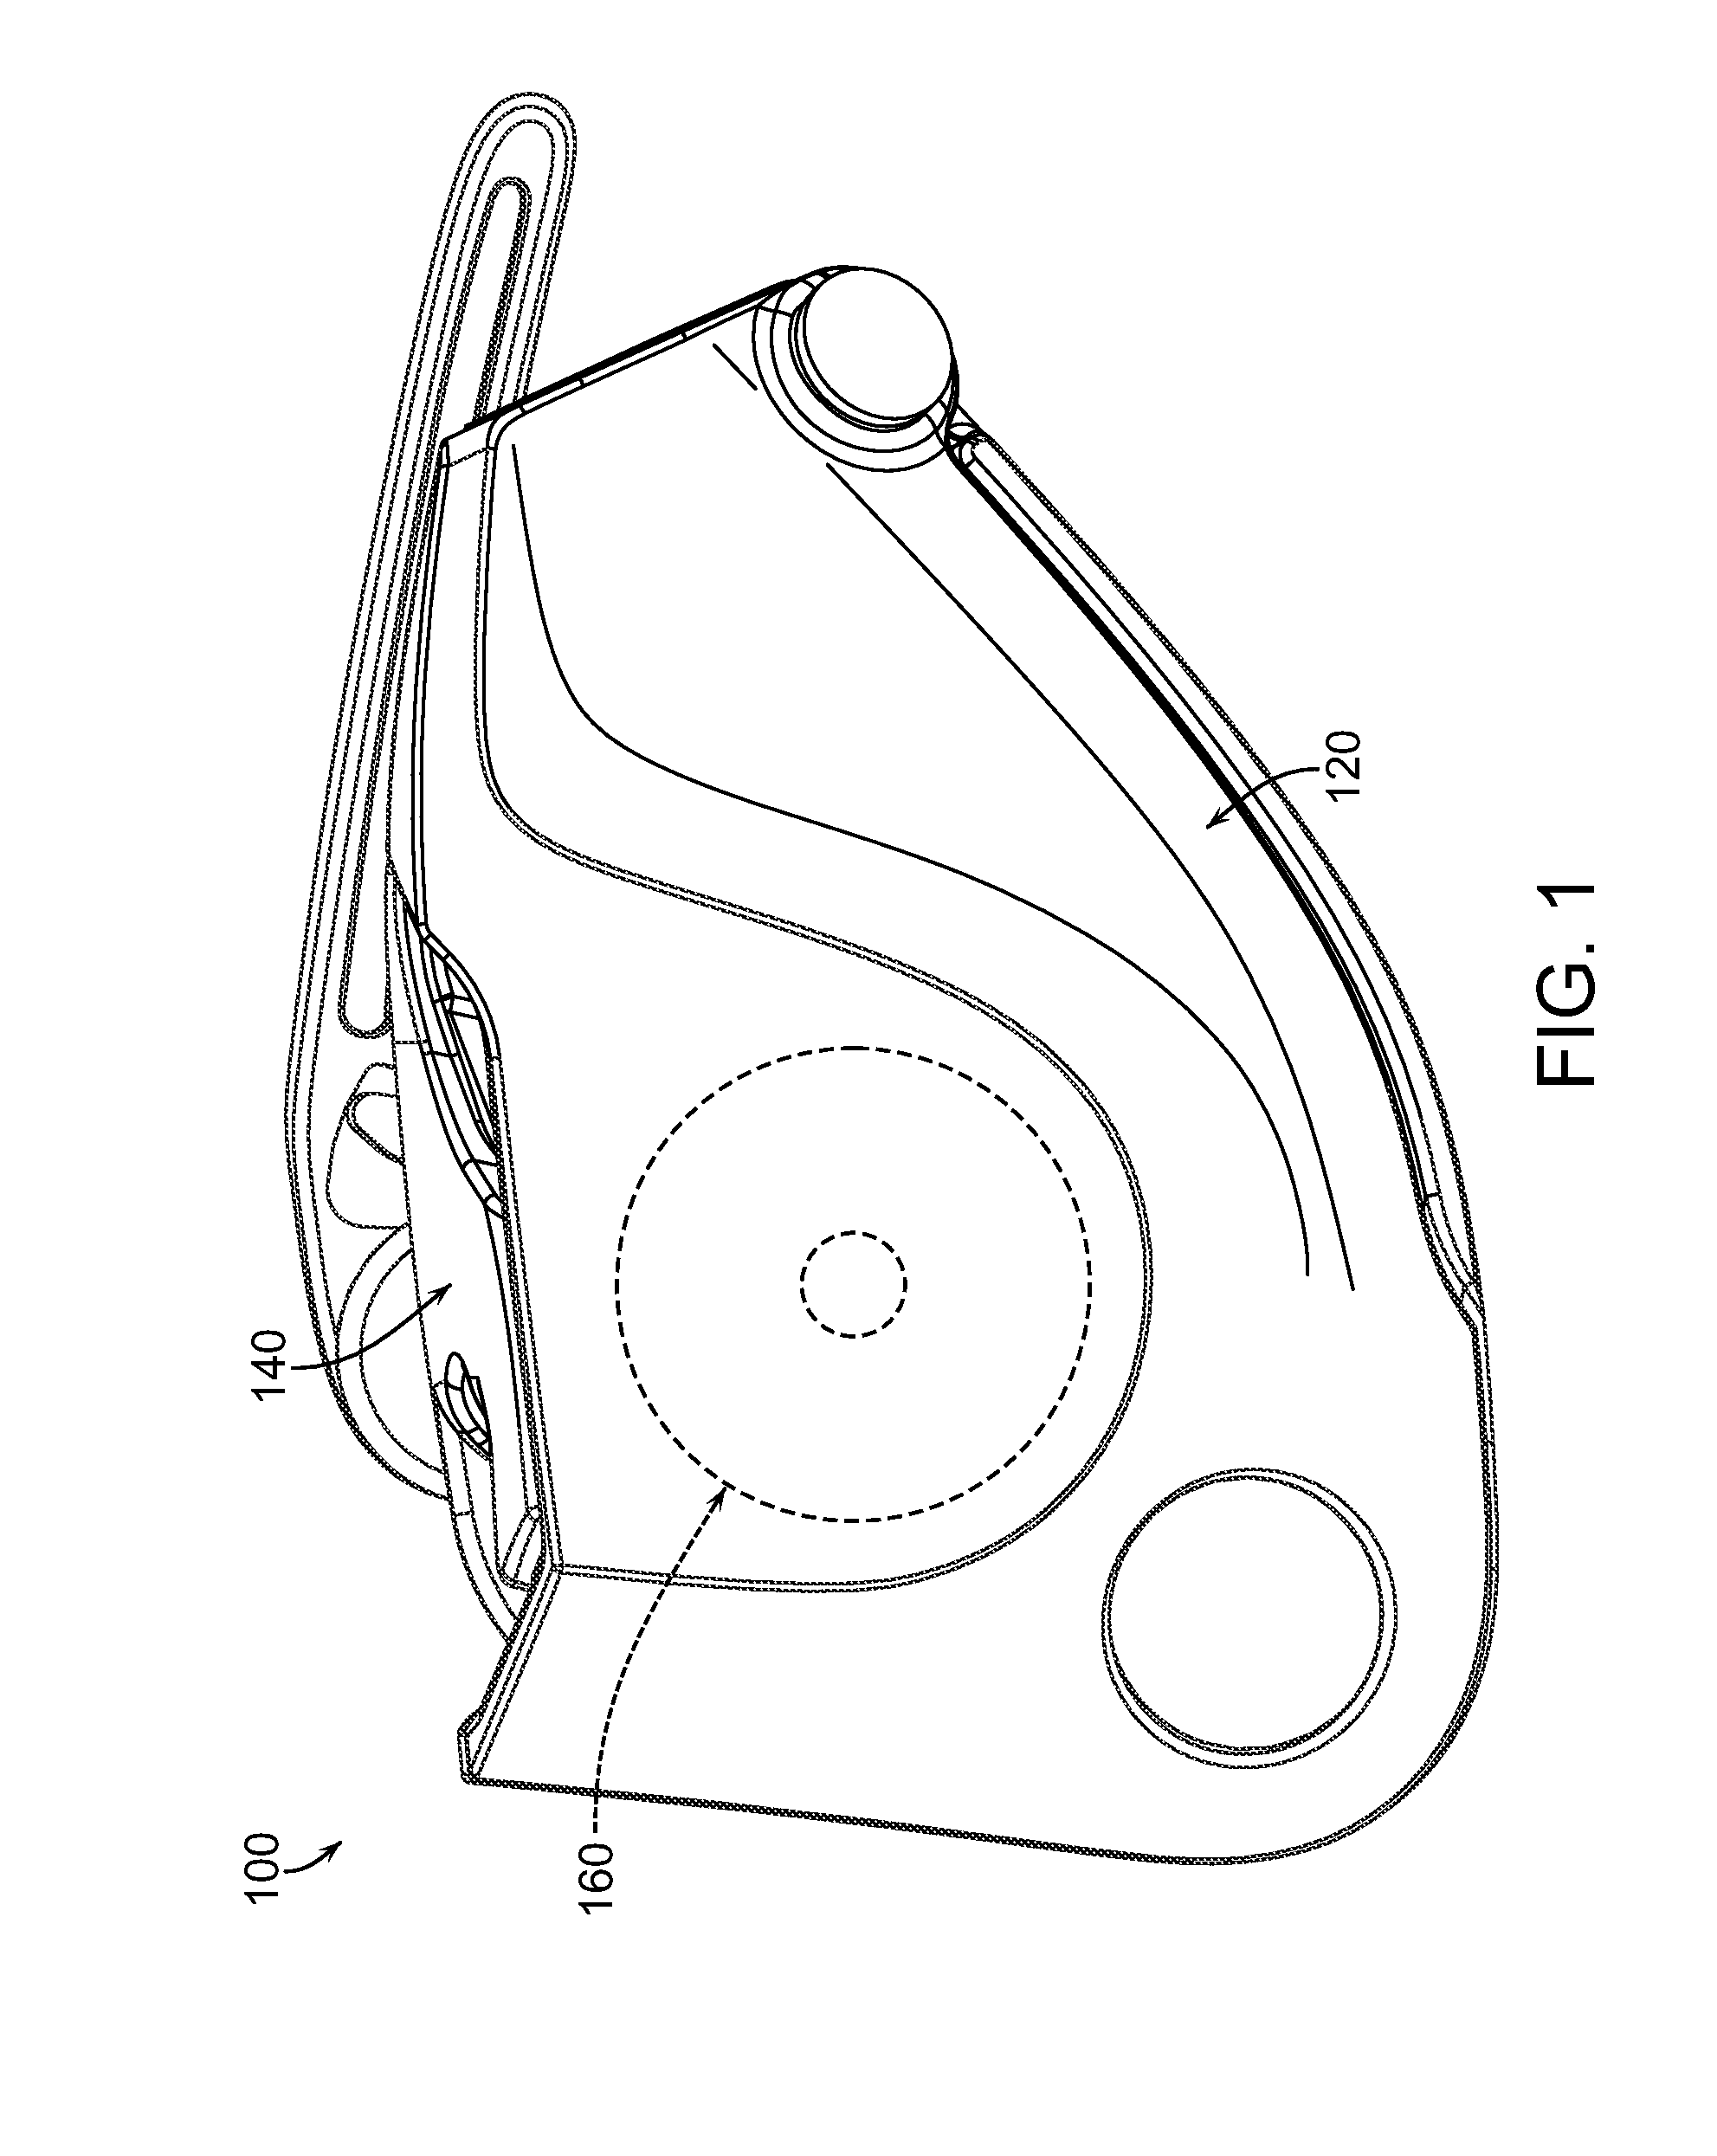 Systems for Assisted Braking Belay with a Cam-Clutch Mechanism